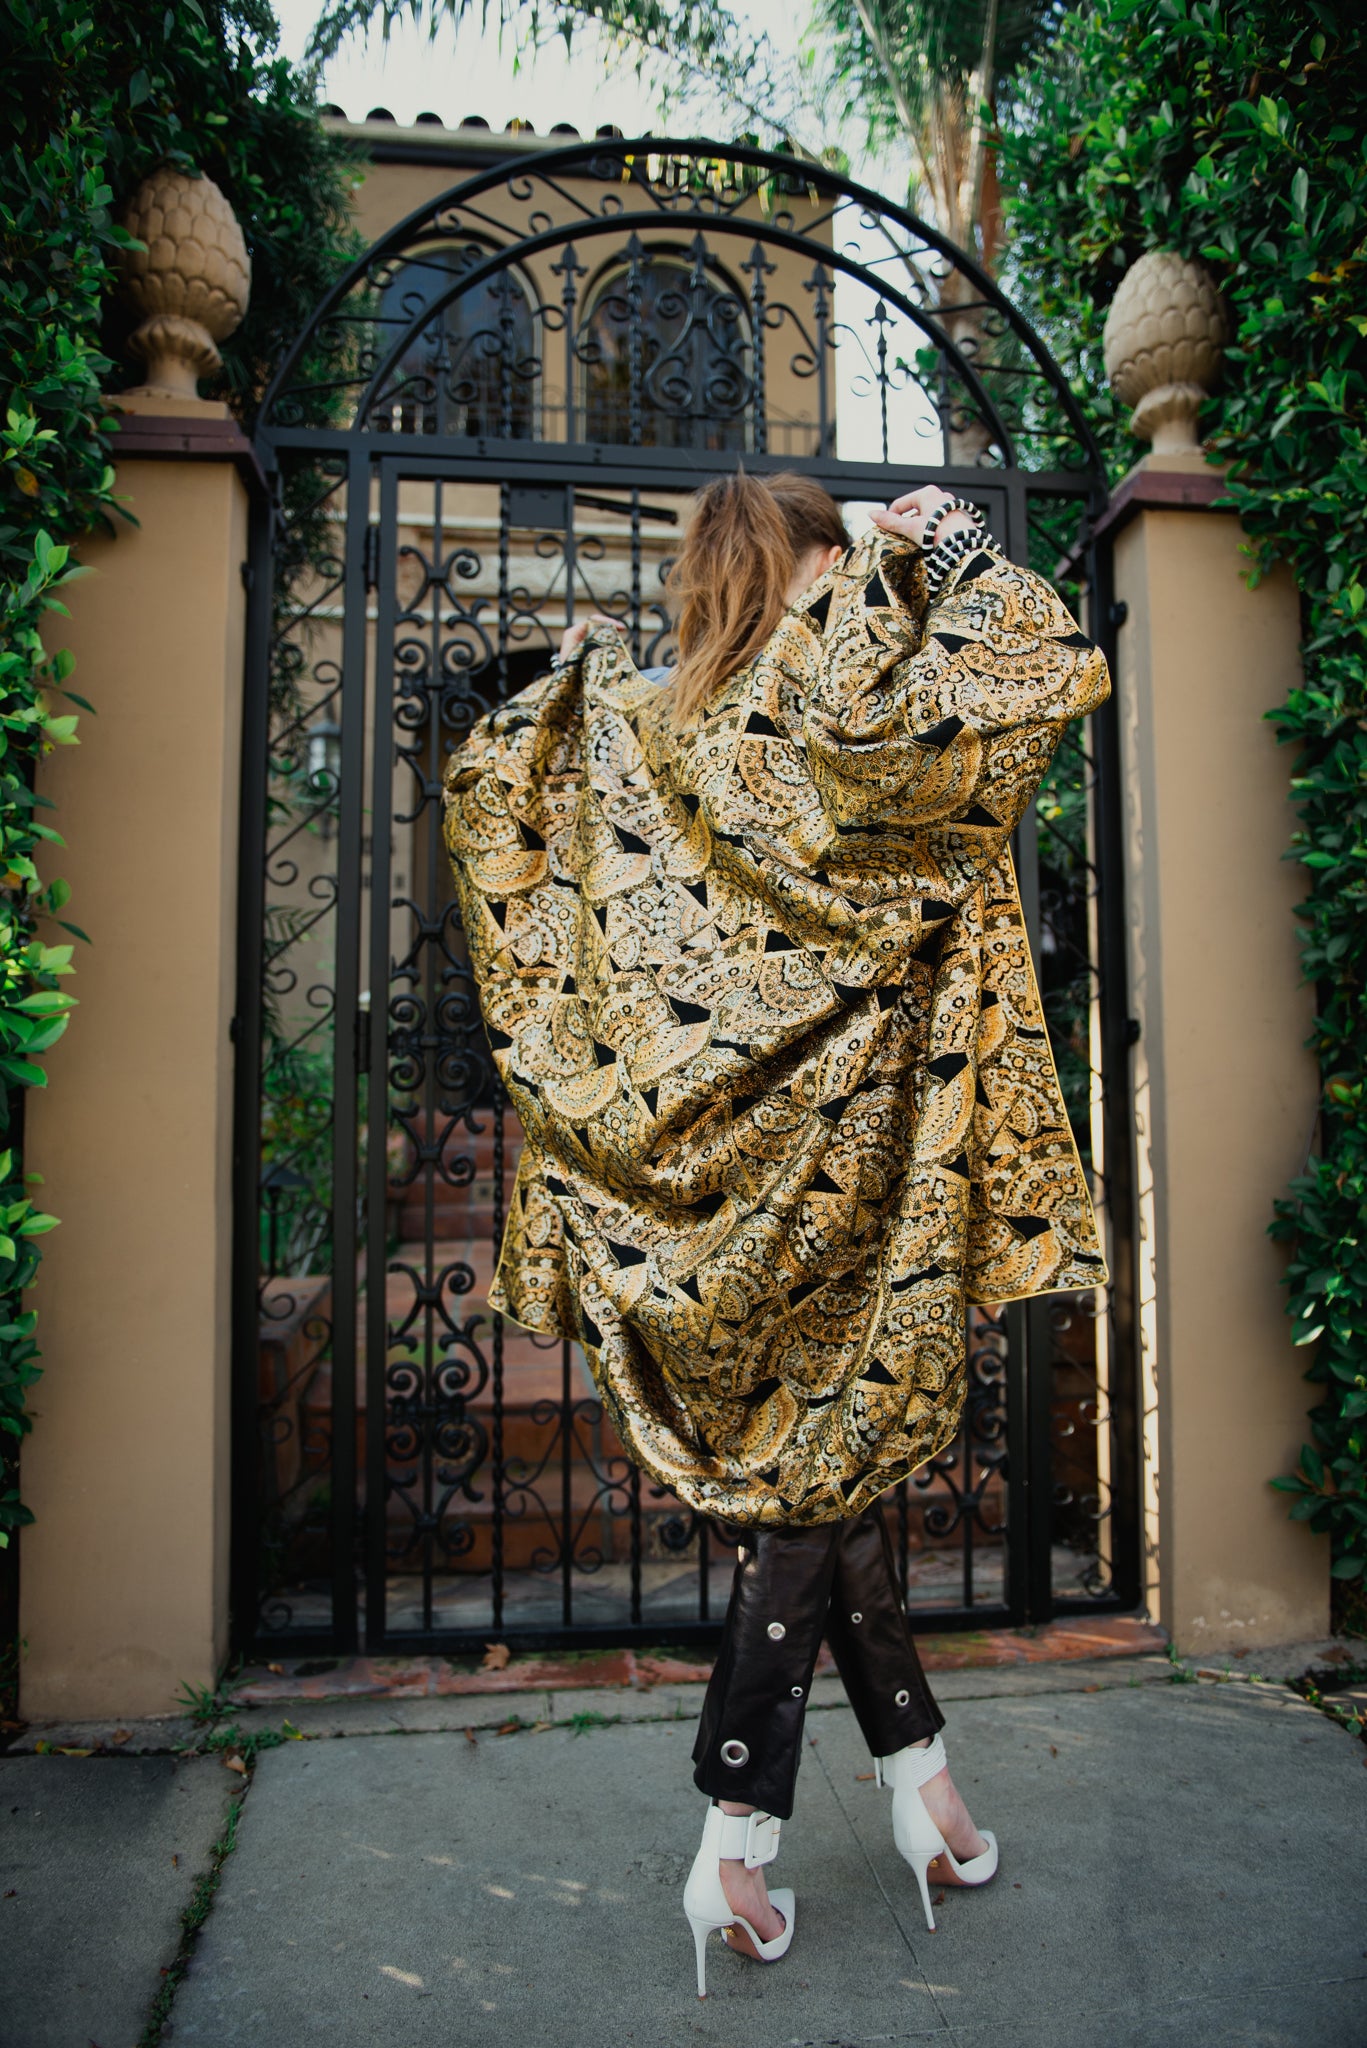 Girl in gold brocade Anthony Muto Cocoon coat leather pants & white heel front of gate